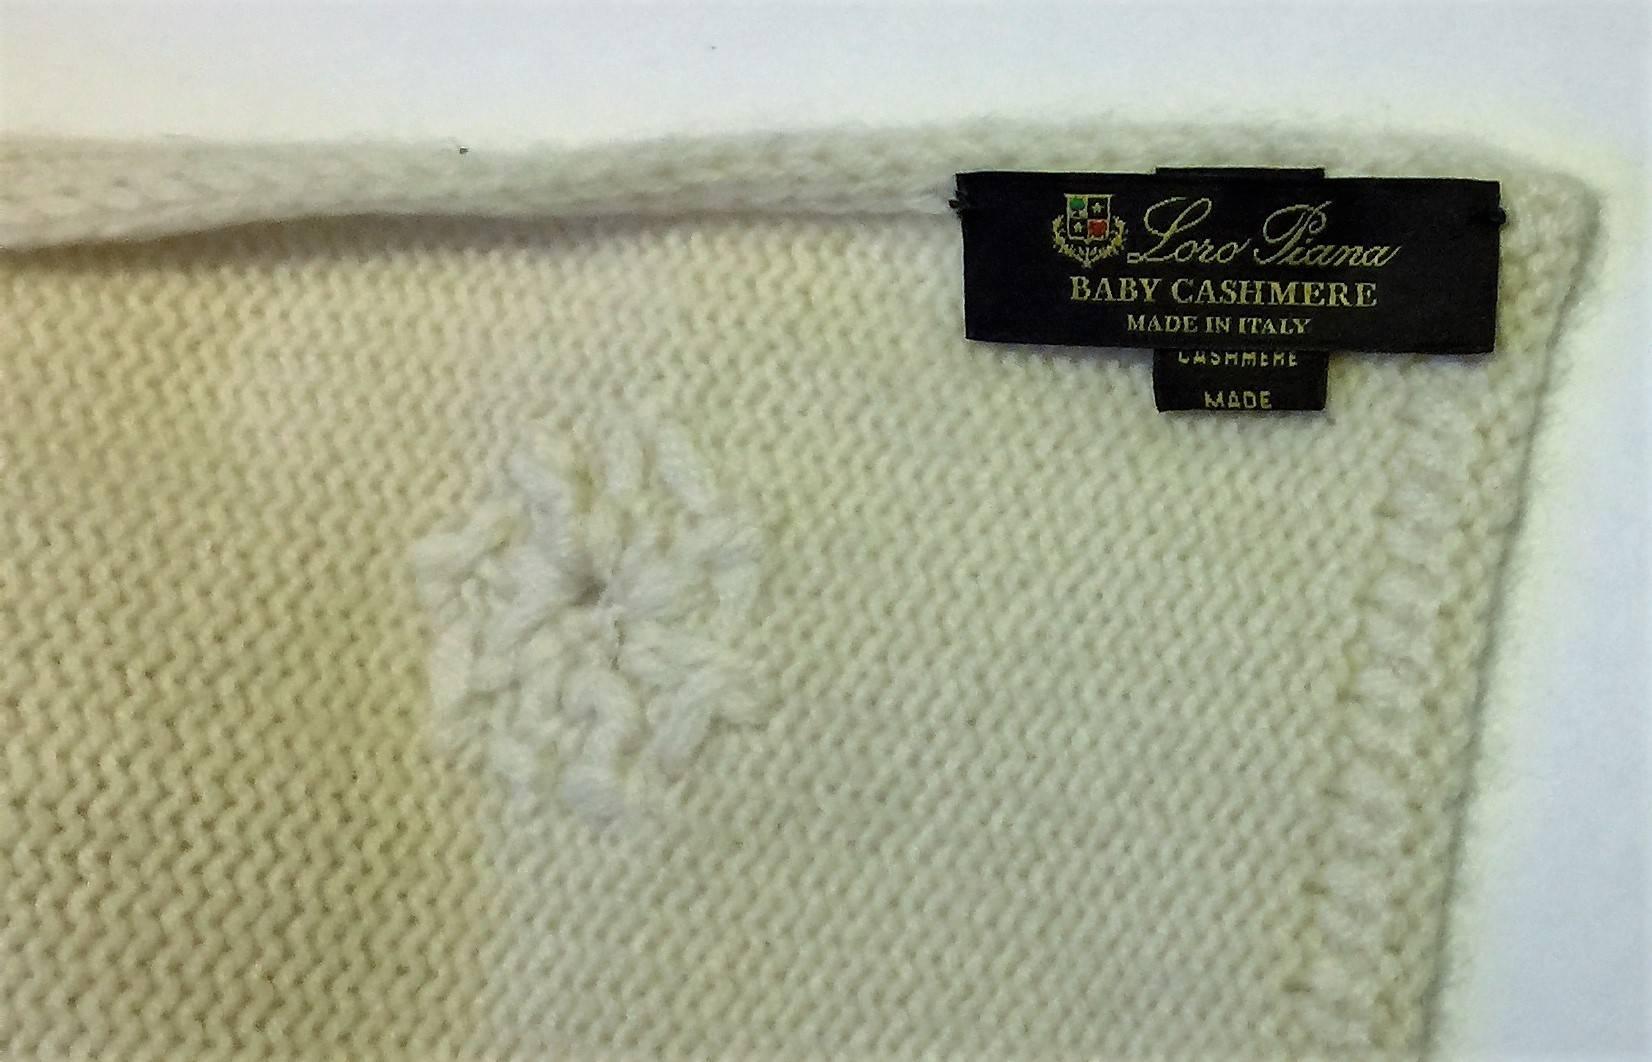 LORO PIANA ‘Snowflake Baby Cashmere Set’. Baby Cashmere Knitted Hat & Scarf Set embellished with Tiny Crystals. Serial Number SCI FAD 4530 1232. Never worn so is ‘as new’. Acquisitively soft, warm accessories for Winter days in the Mountains and